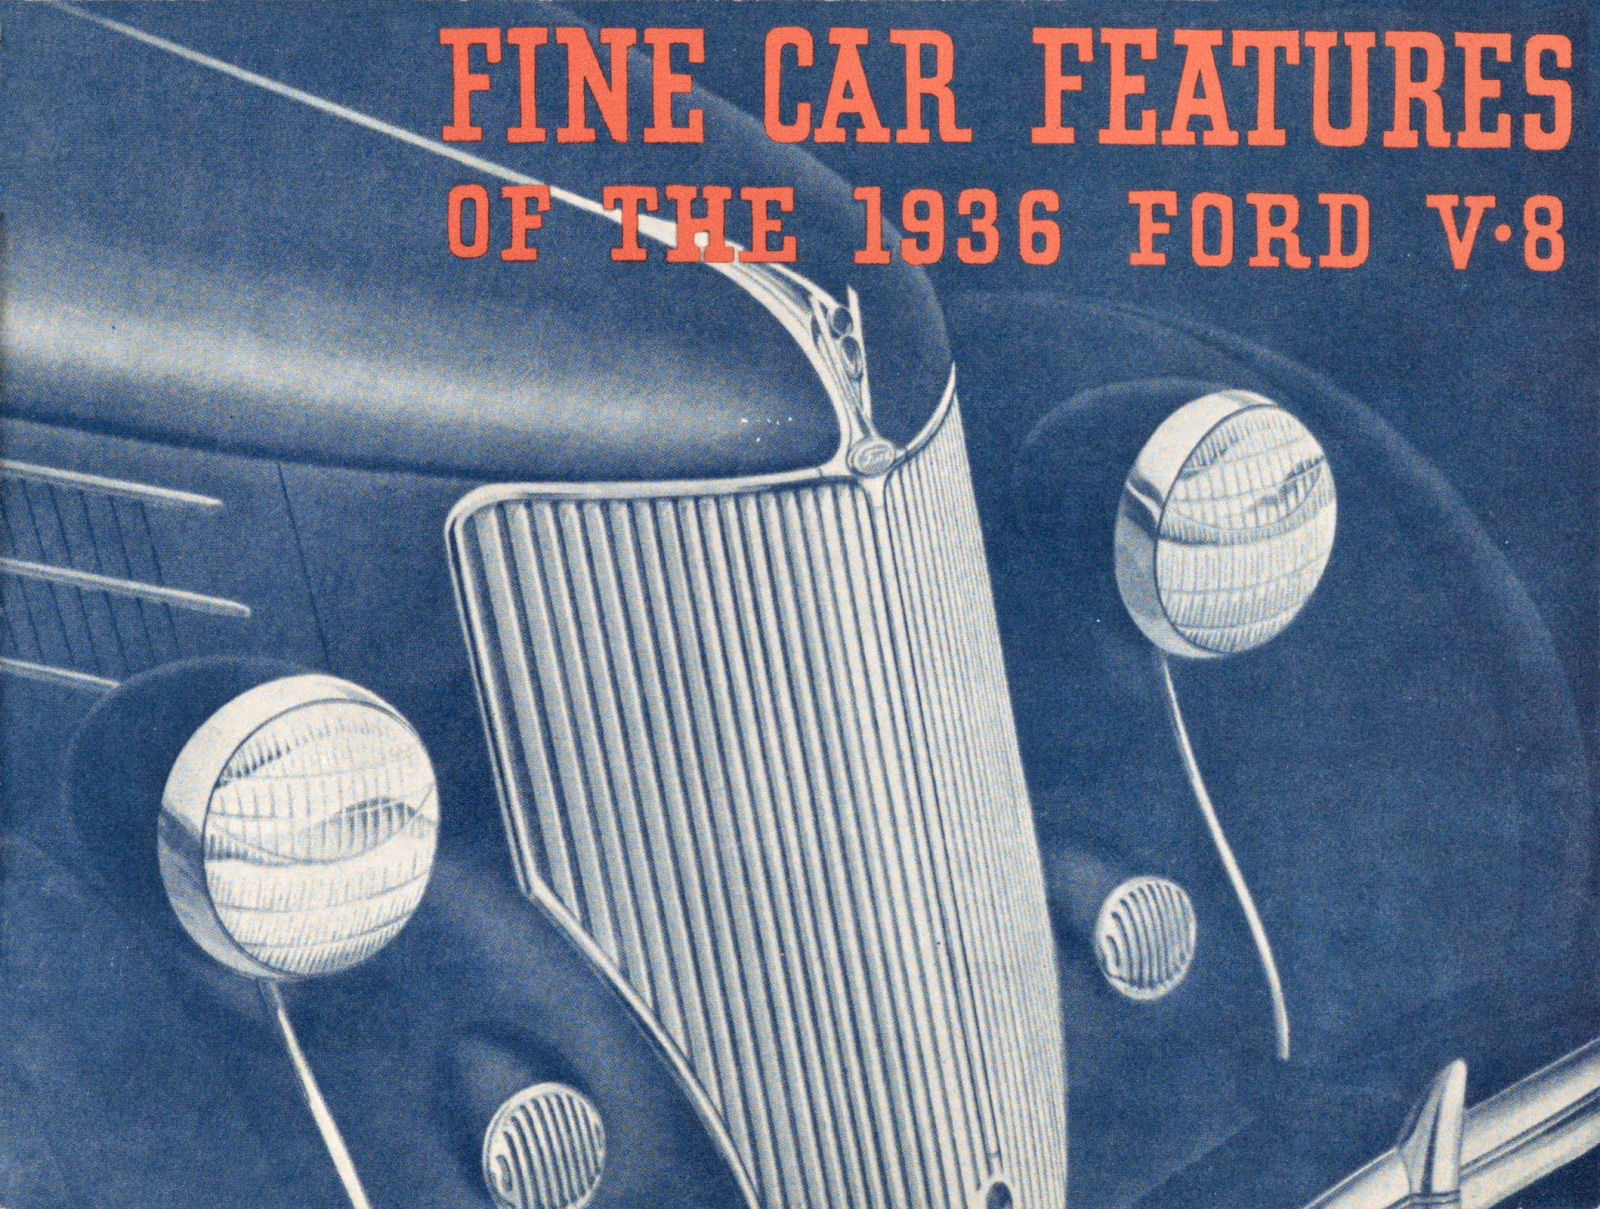 1936 Ford Features_Page_01